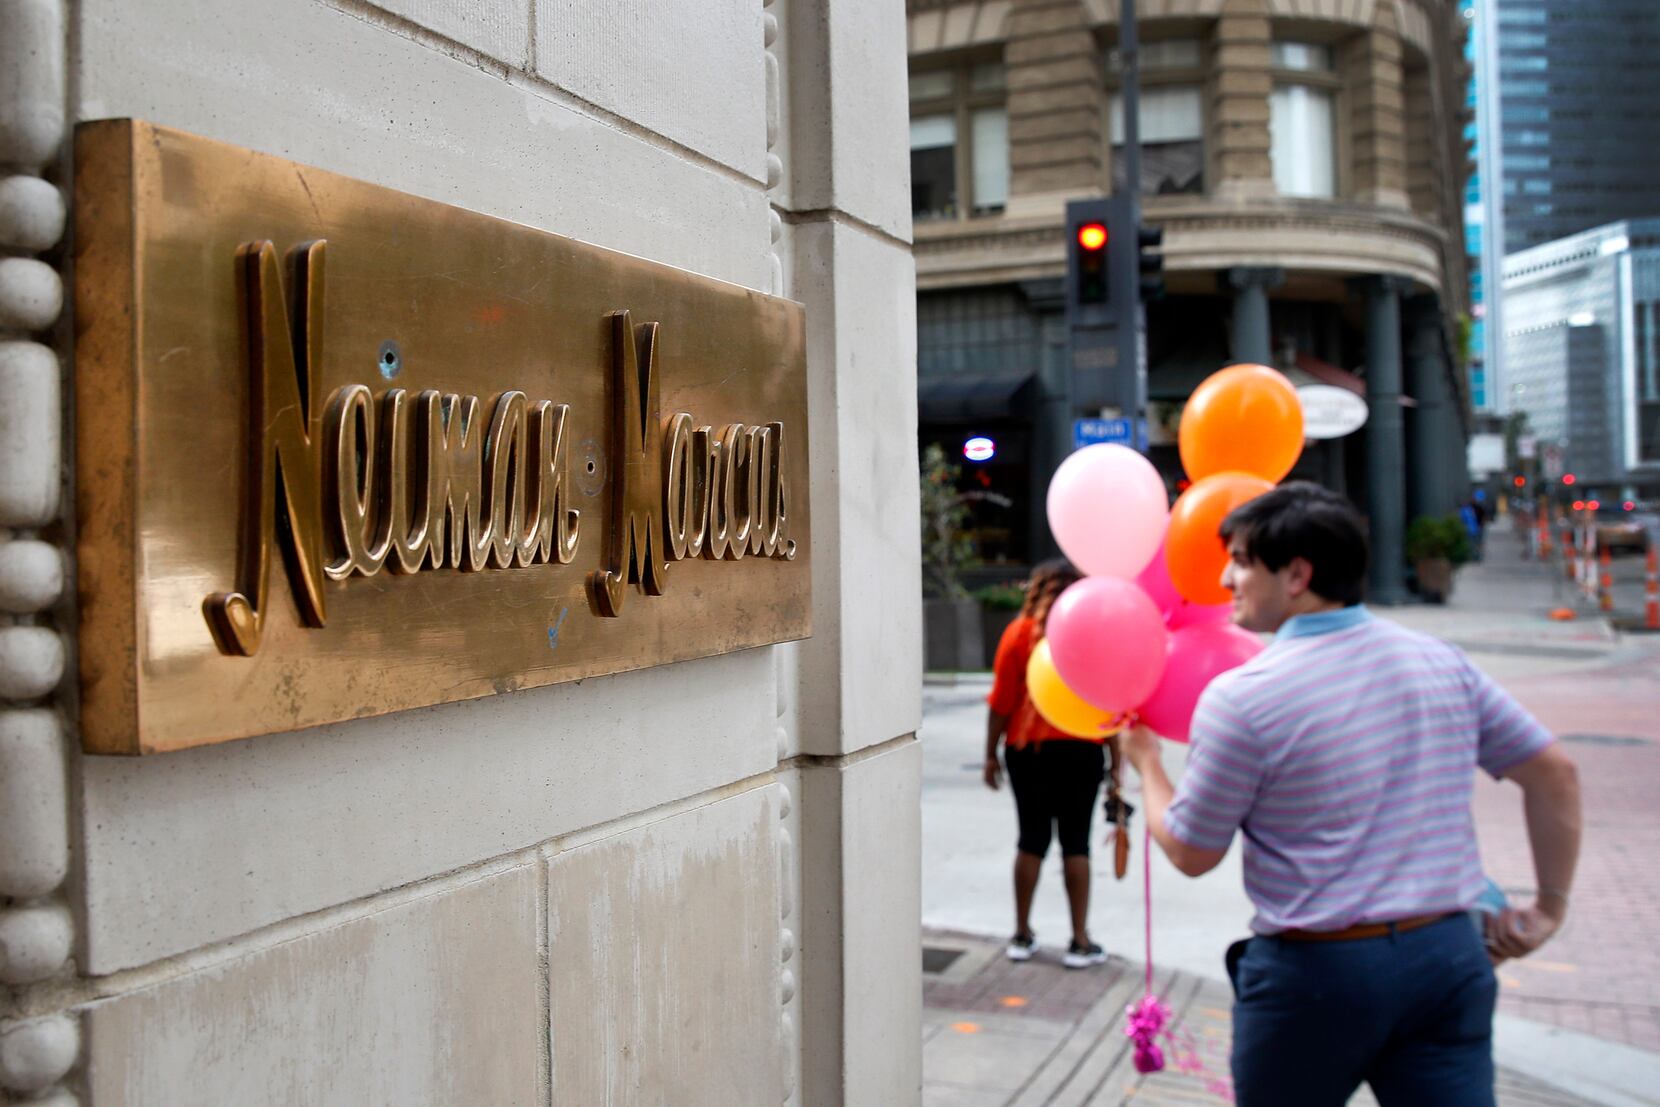 Neiman Marcus' missed April interest payment could accelerate a forced  bankruptcy filing